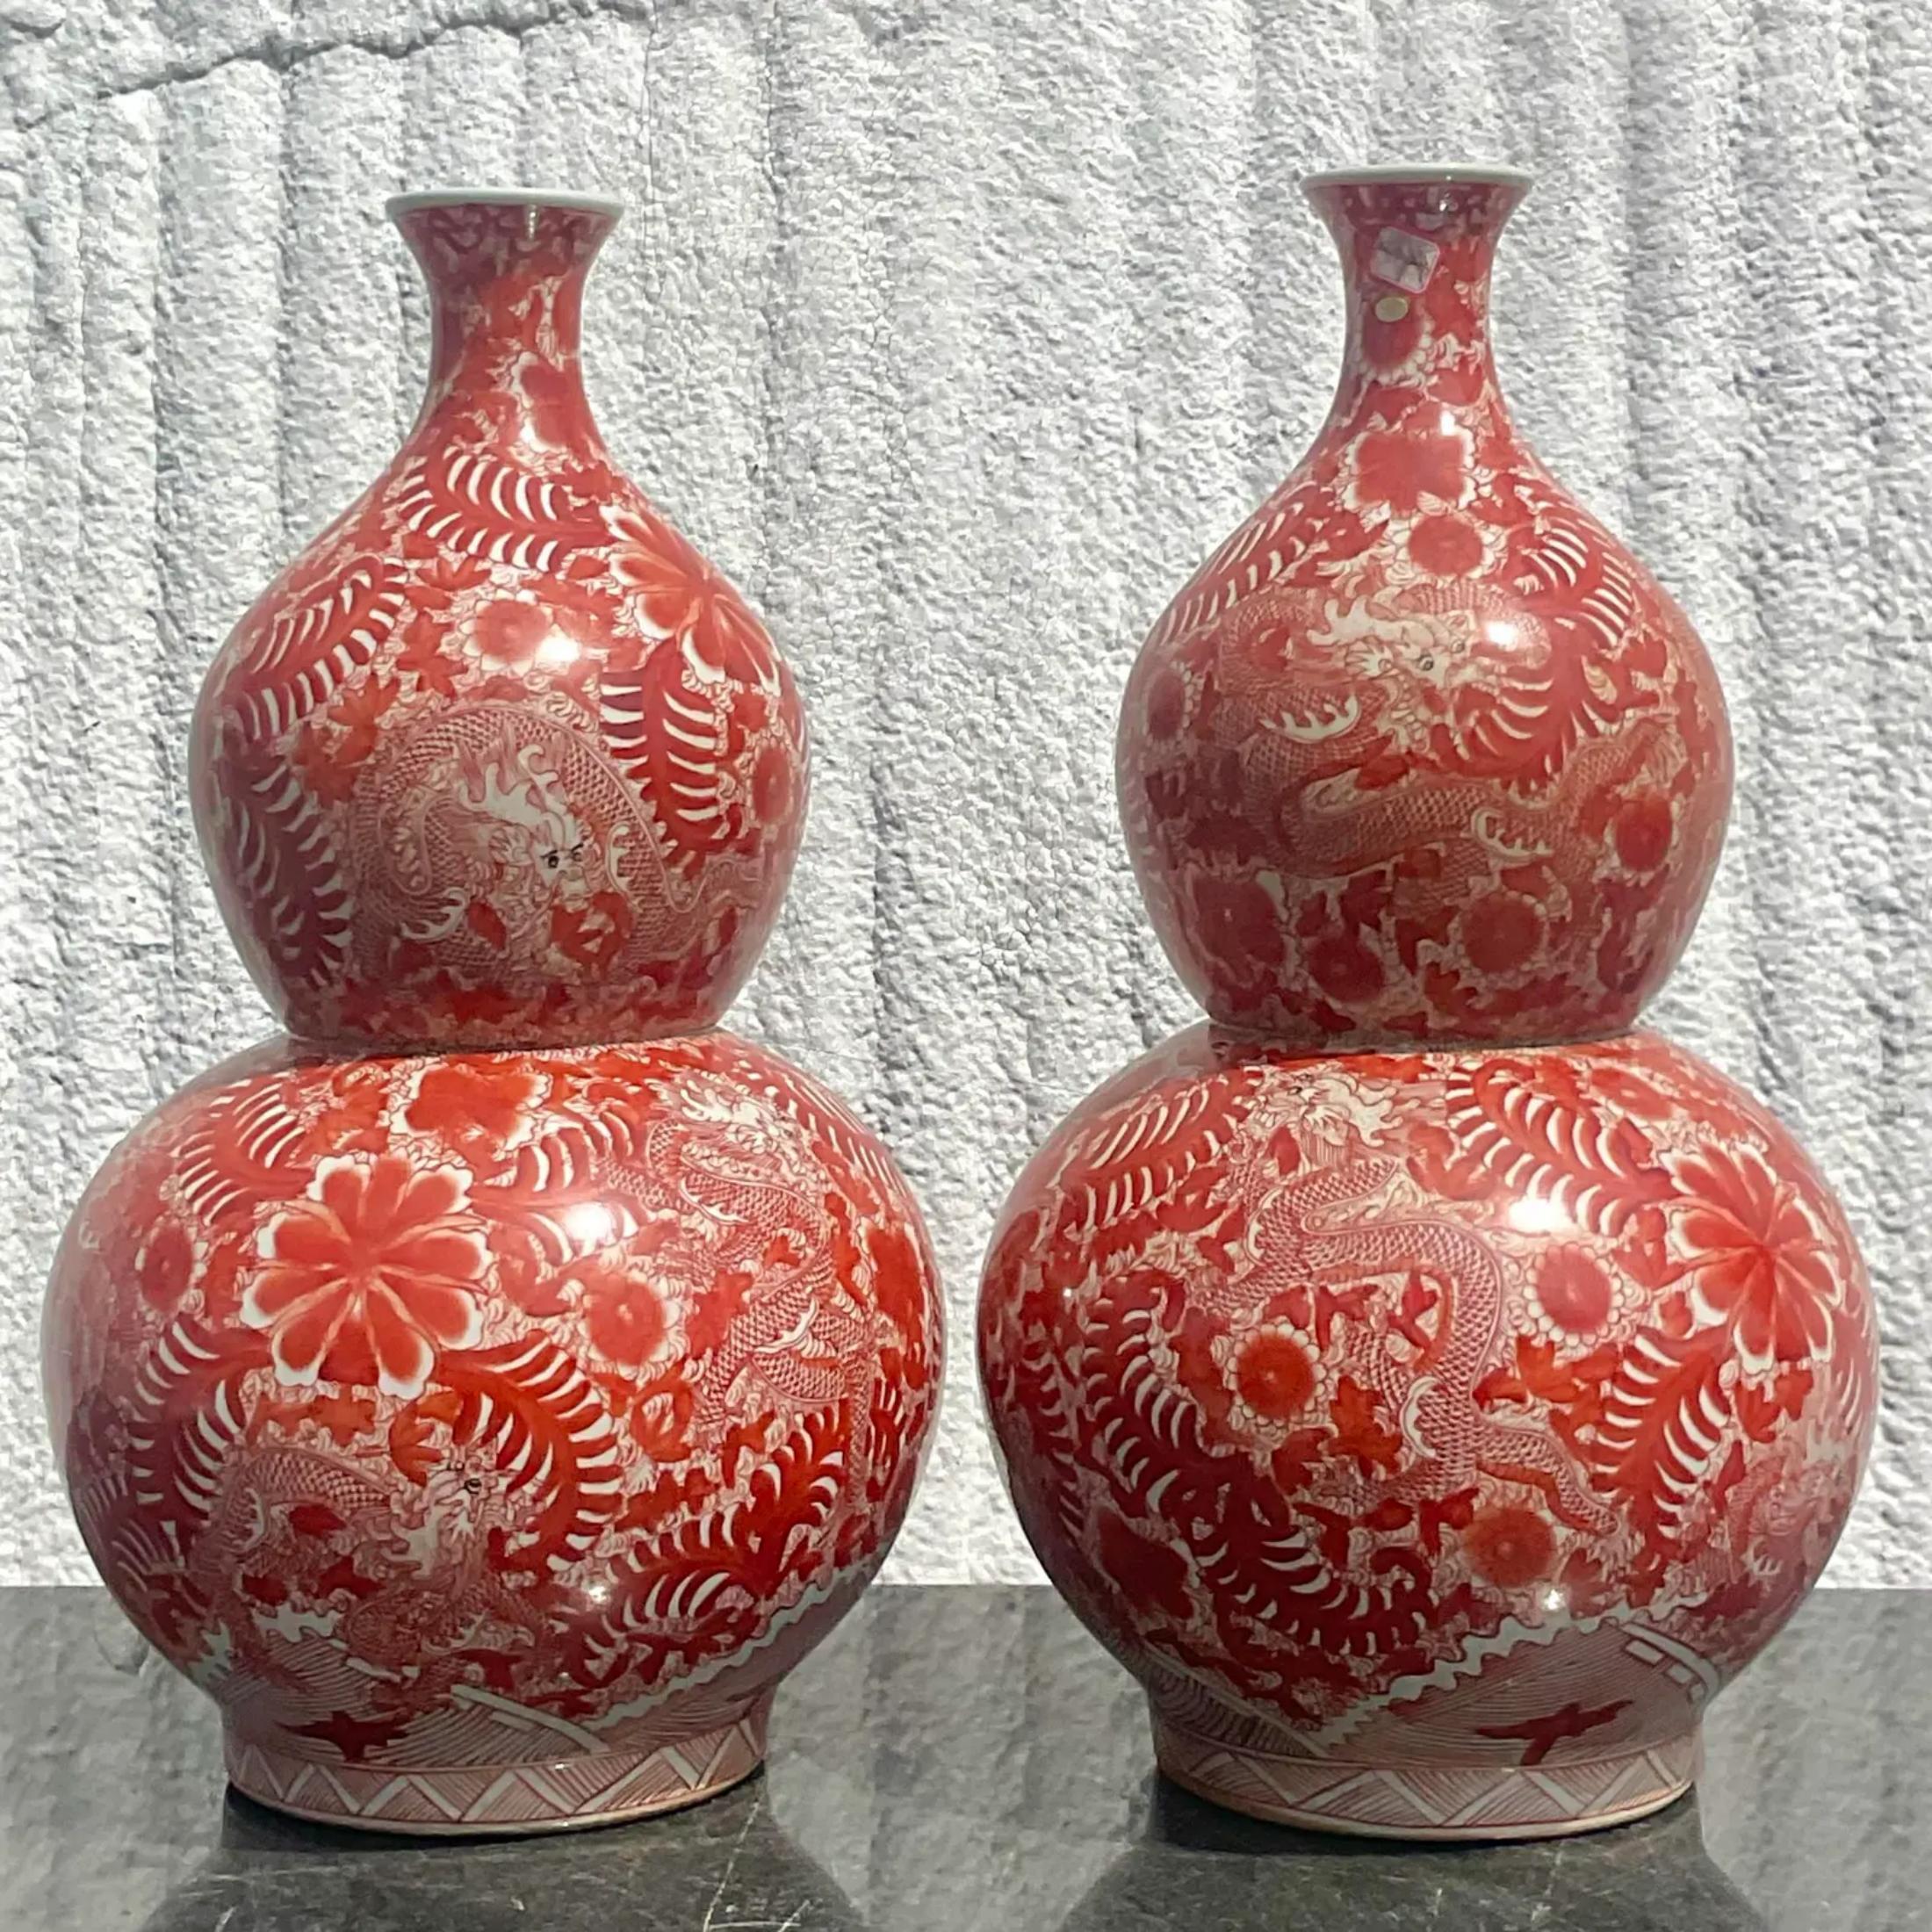 Chinese Vintage Asian Glazed Ceramic Double Gourd Lamps - a Pair For Sale